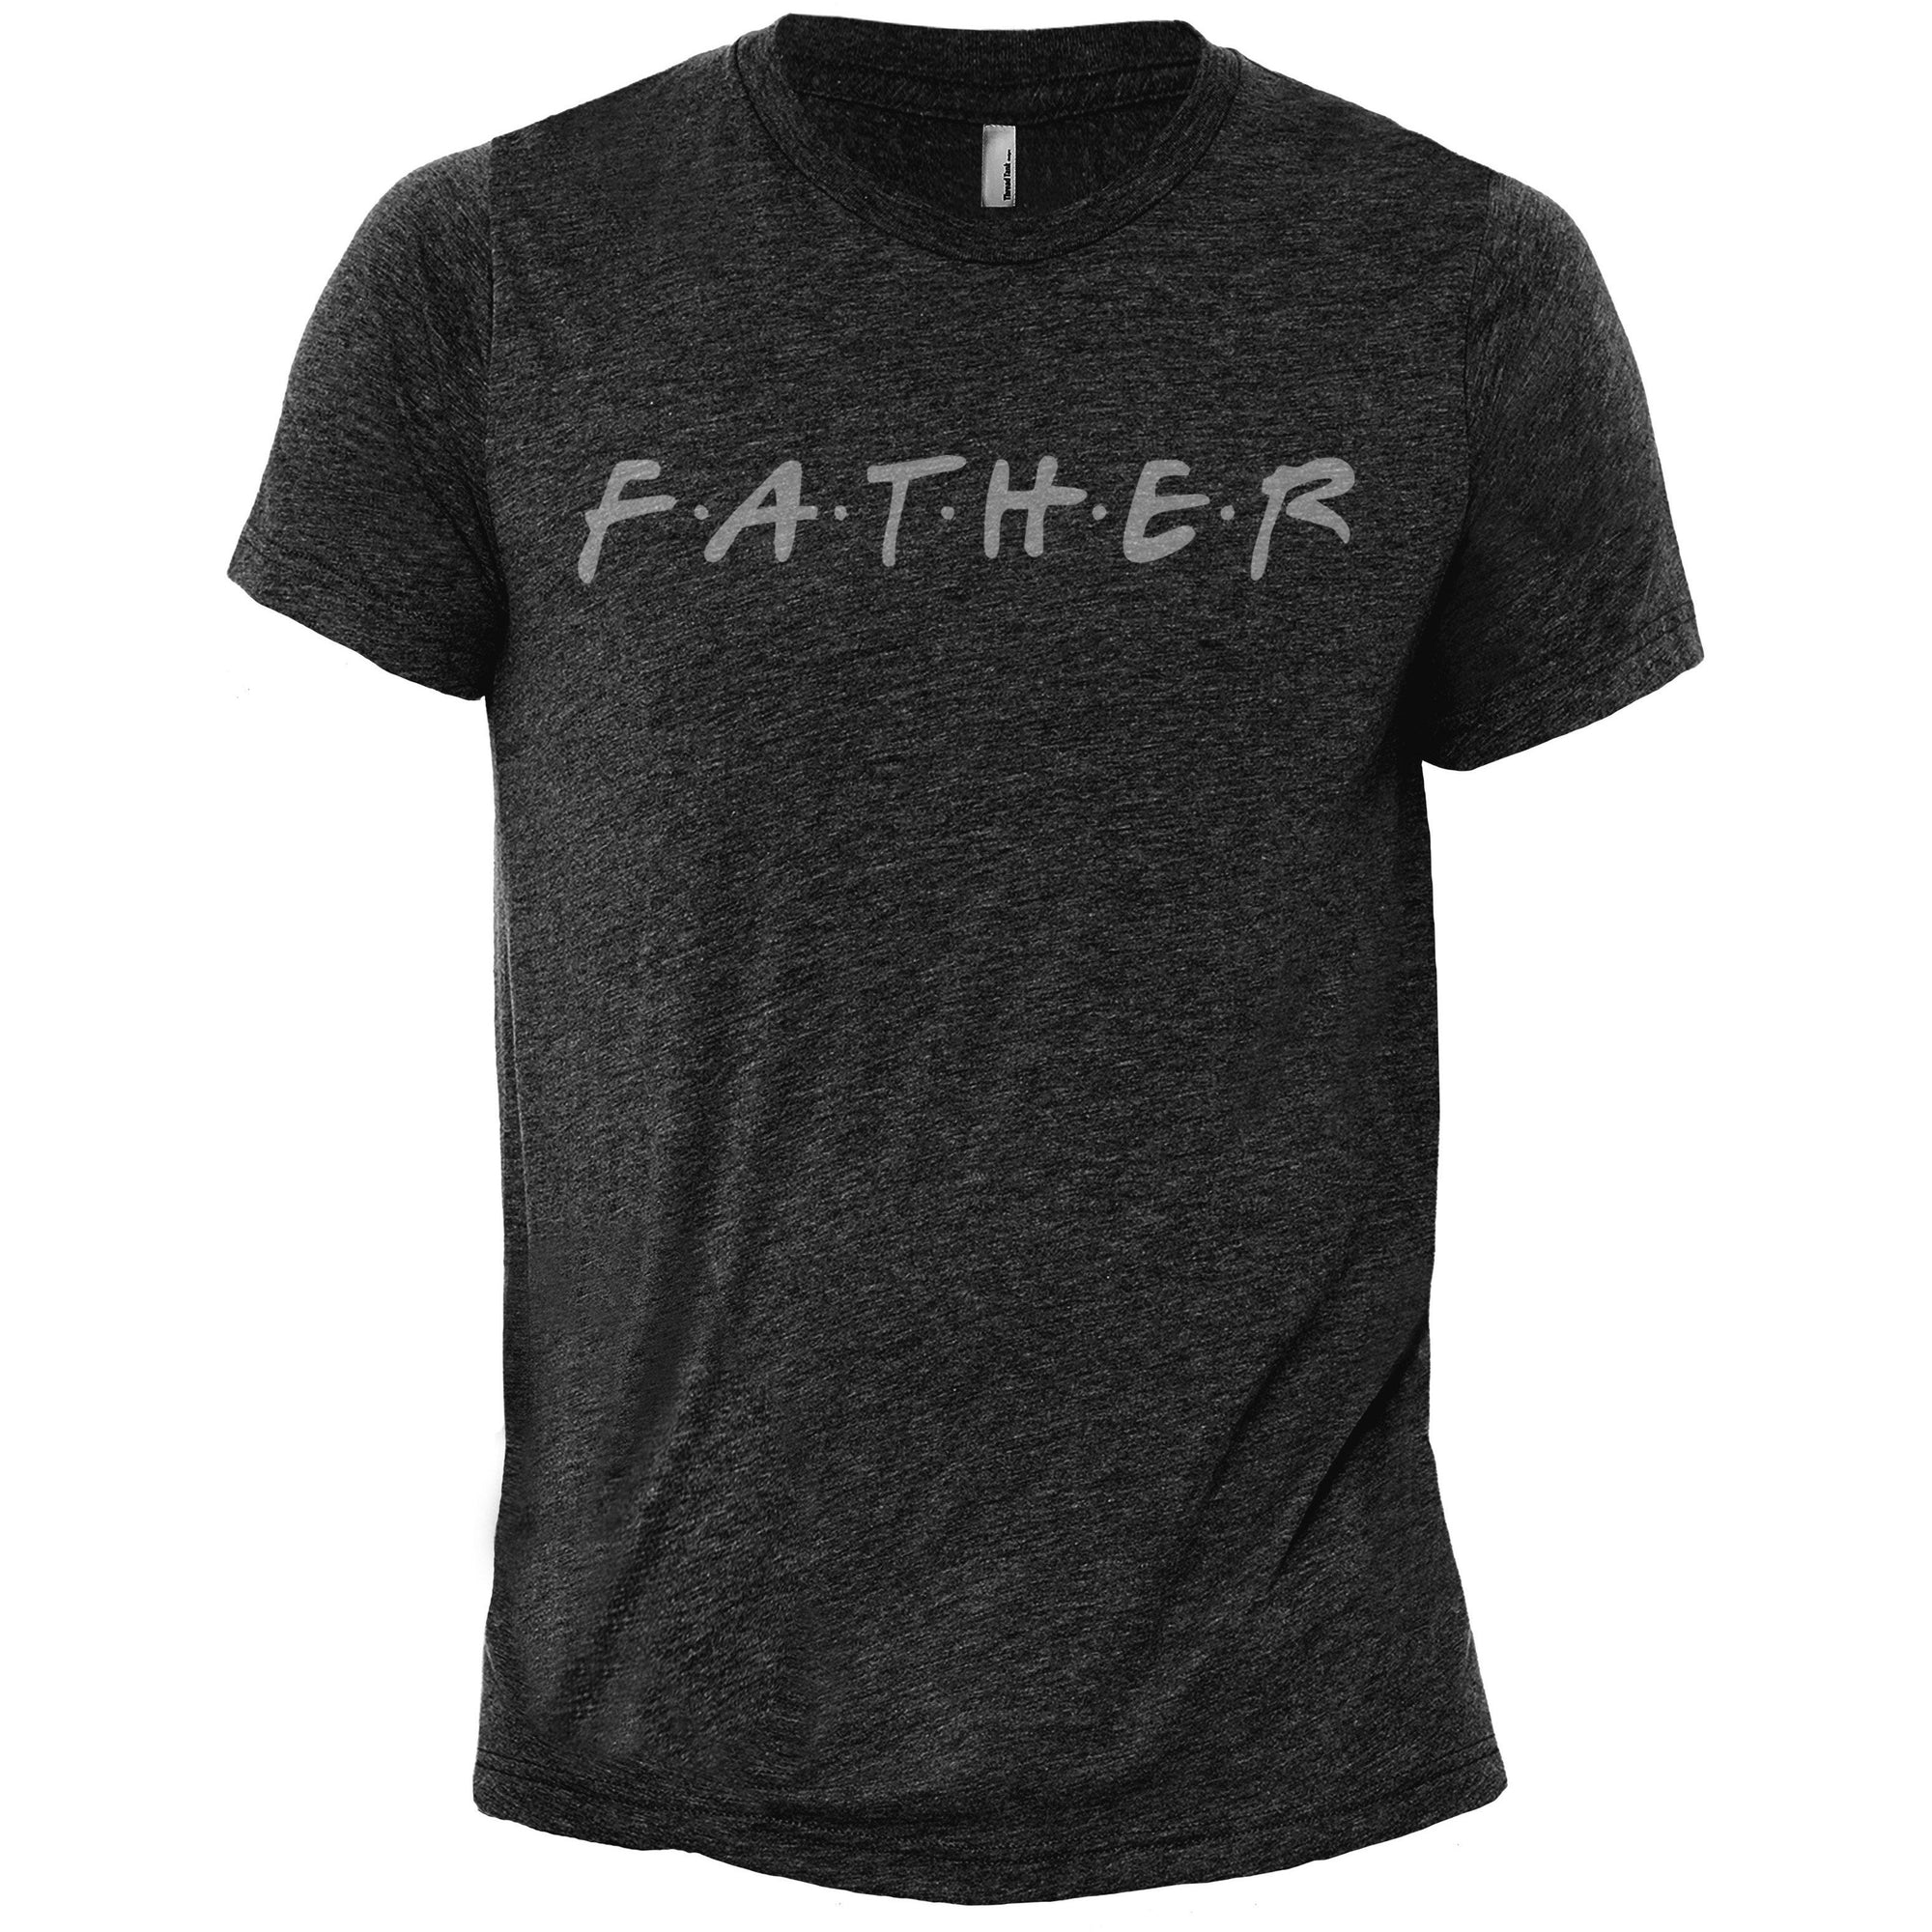 Father Friends Charcoal Printed Graphic Men's Crew T-Shirt Tee